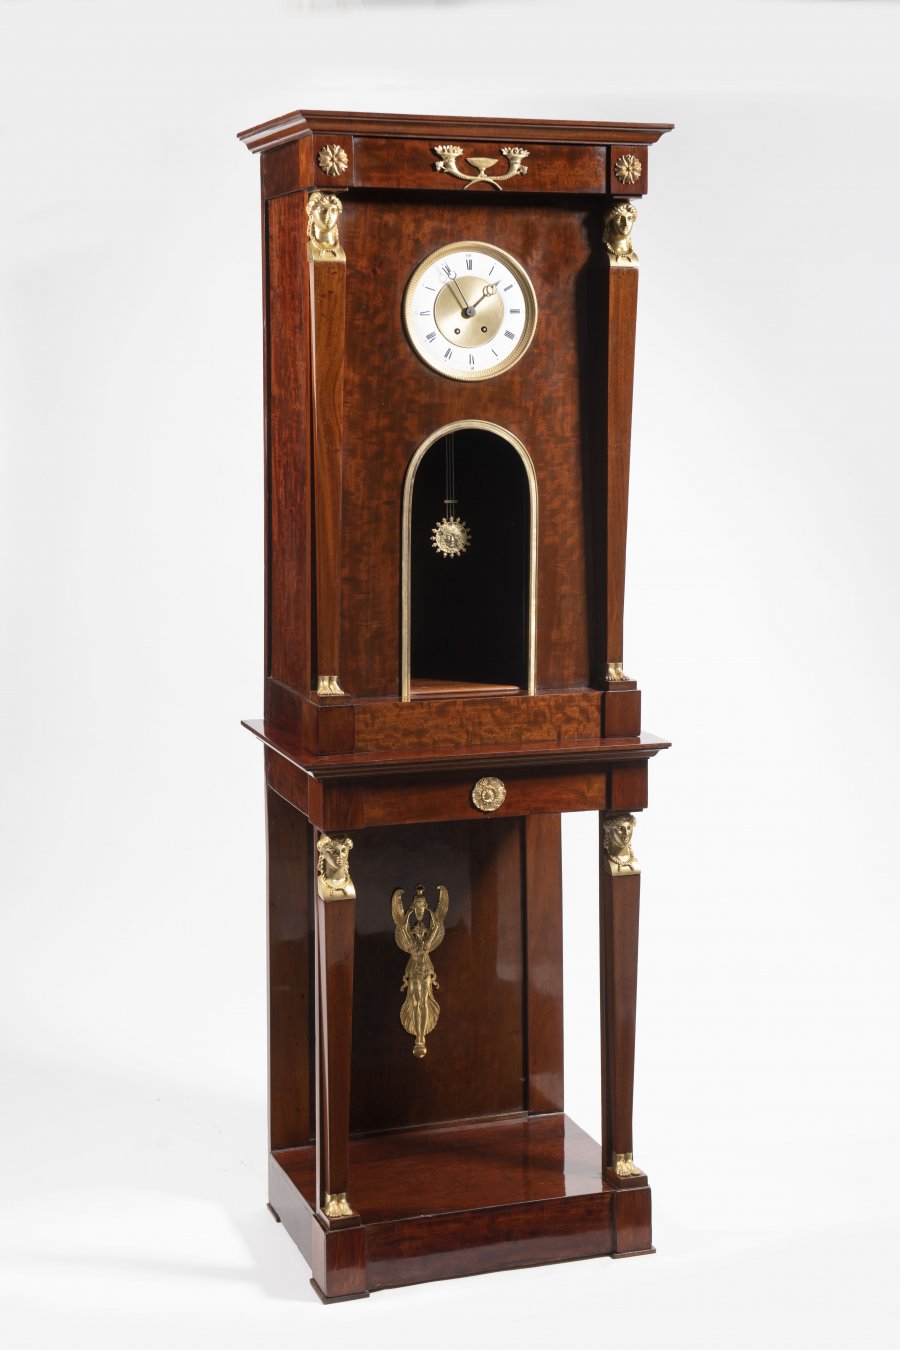 AN EMPIRE STYLE STANDING CLOCK